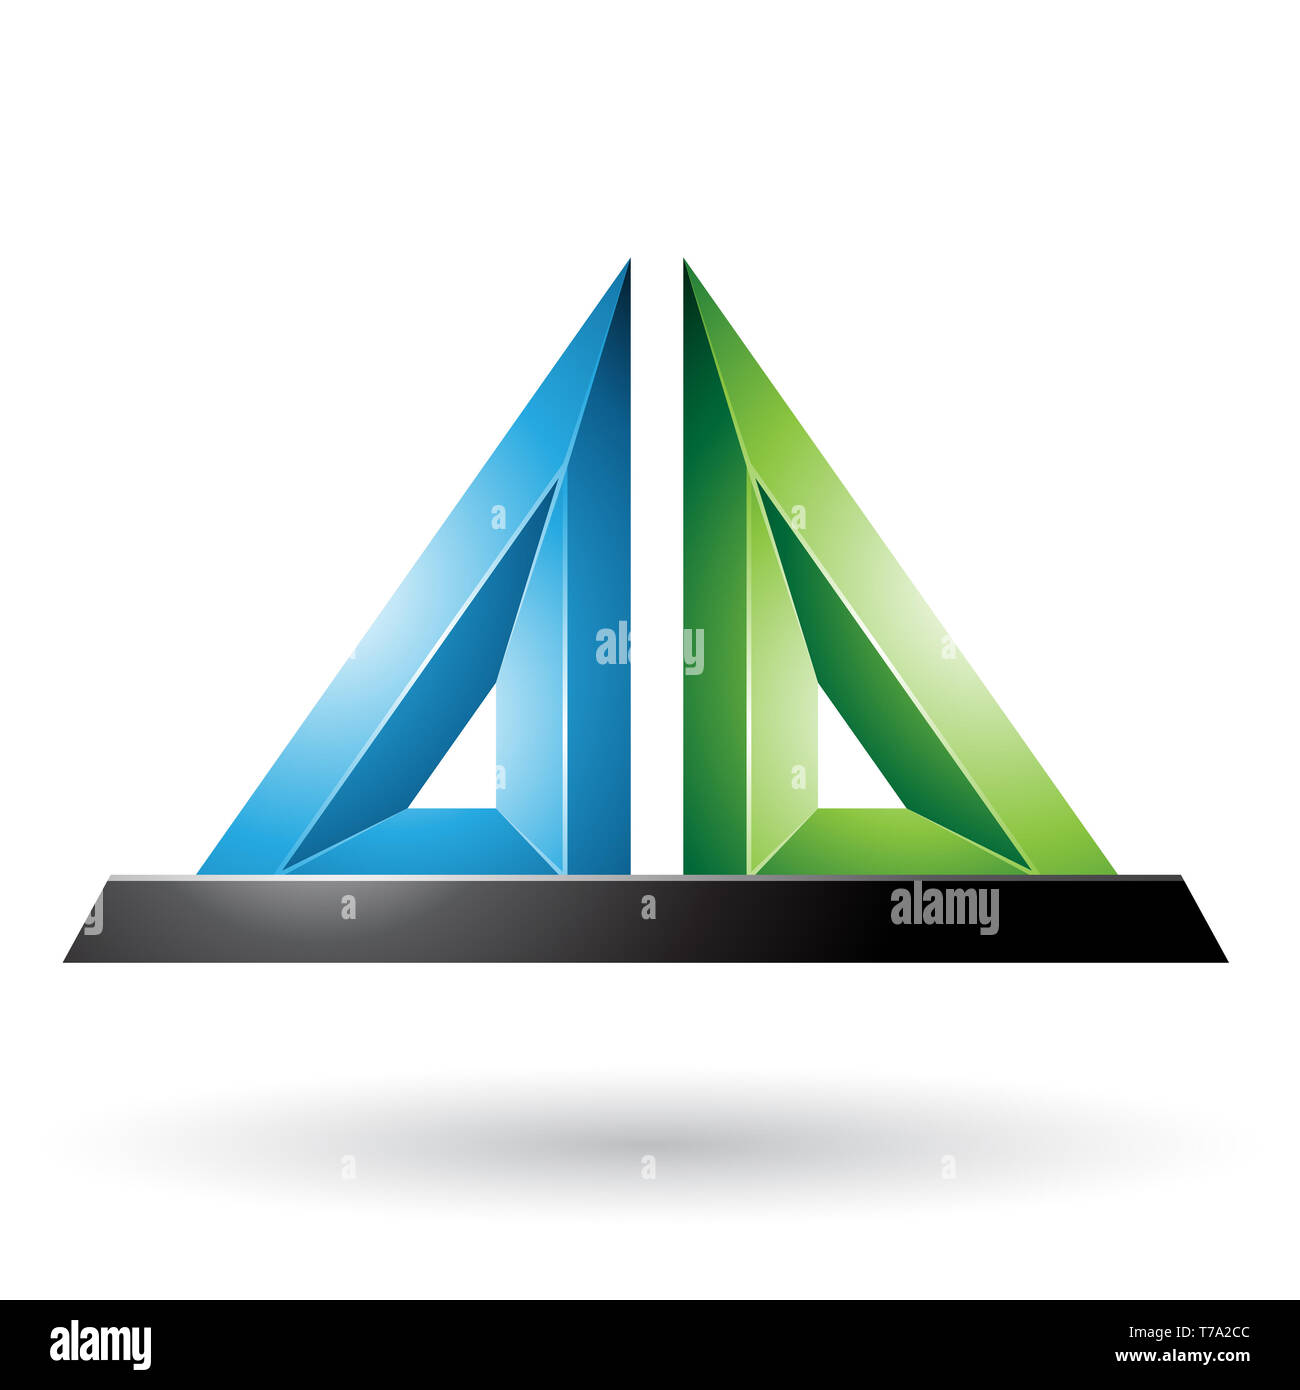 Vector Illustration of Blue and Green 3d Pyramidical Embossed Shape isolated on a White Background Stock Photo